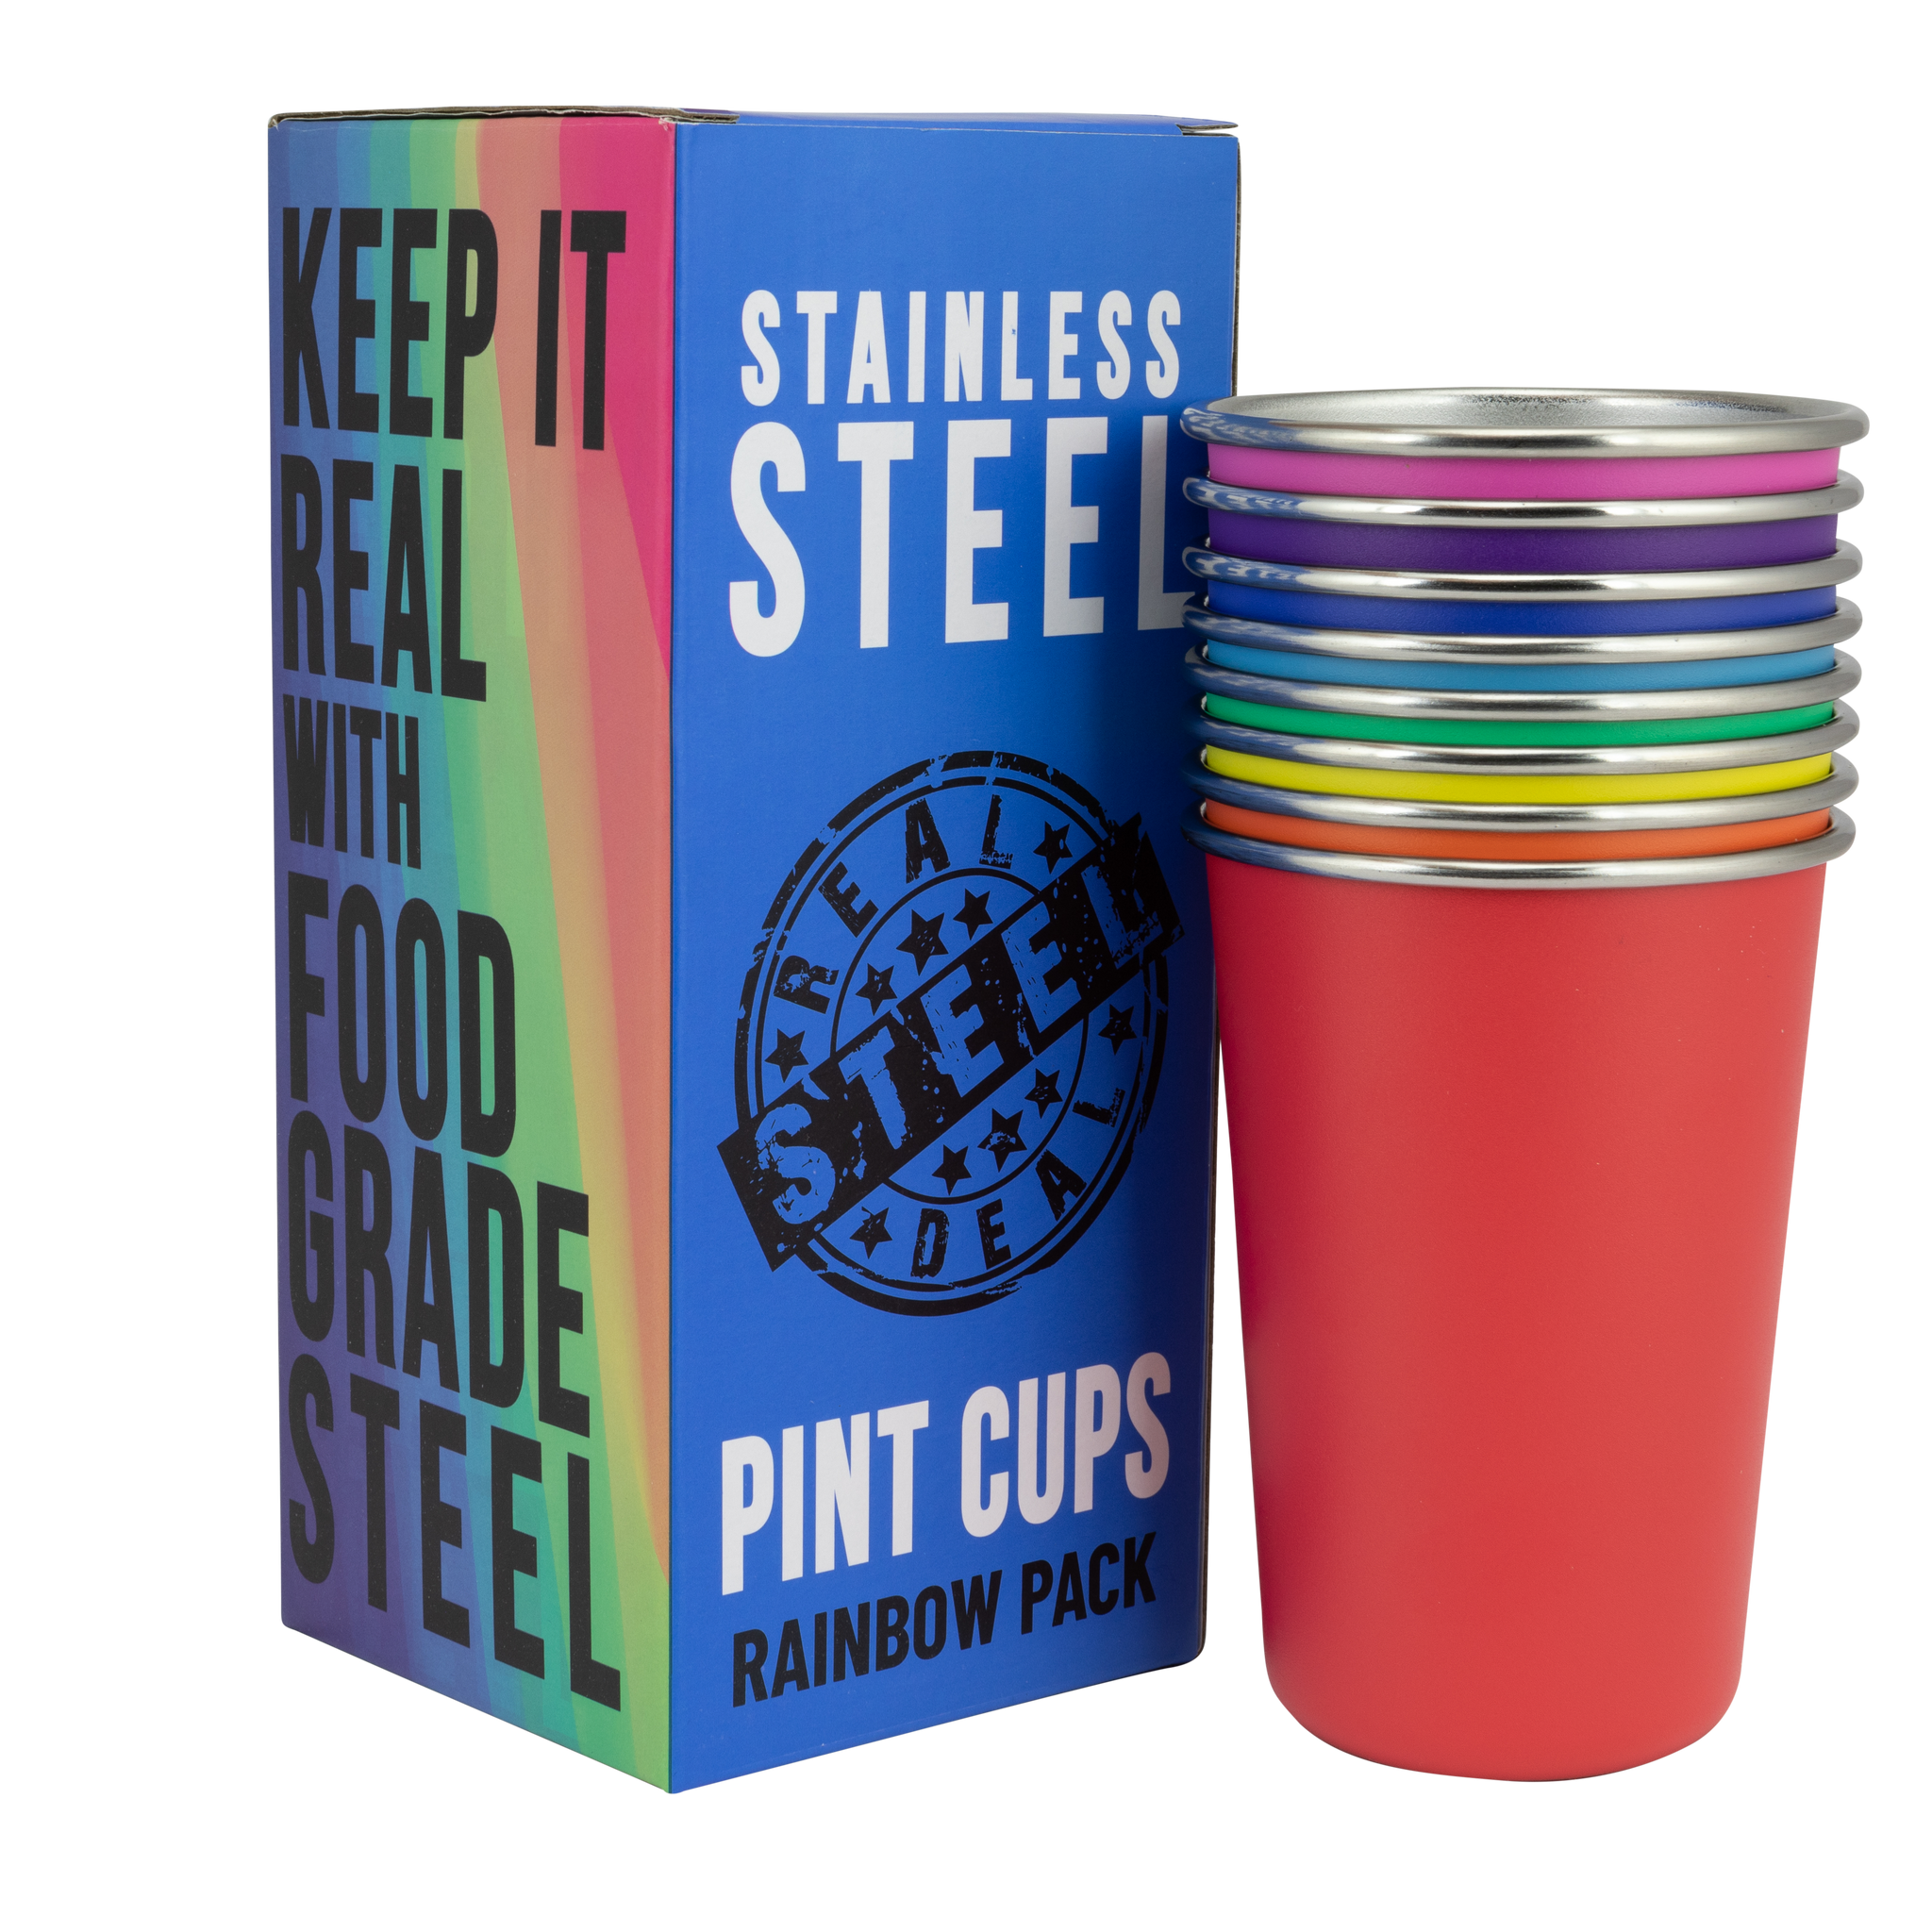 50 Pcs 8.8 Oz Stainless Steel Cups Bulk Small Metal Pint Cups Unbreakable  Drinking Glasses Reusable …See more 50 Pcs 8.8 Oz Stainless Steel Cups Bulk